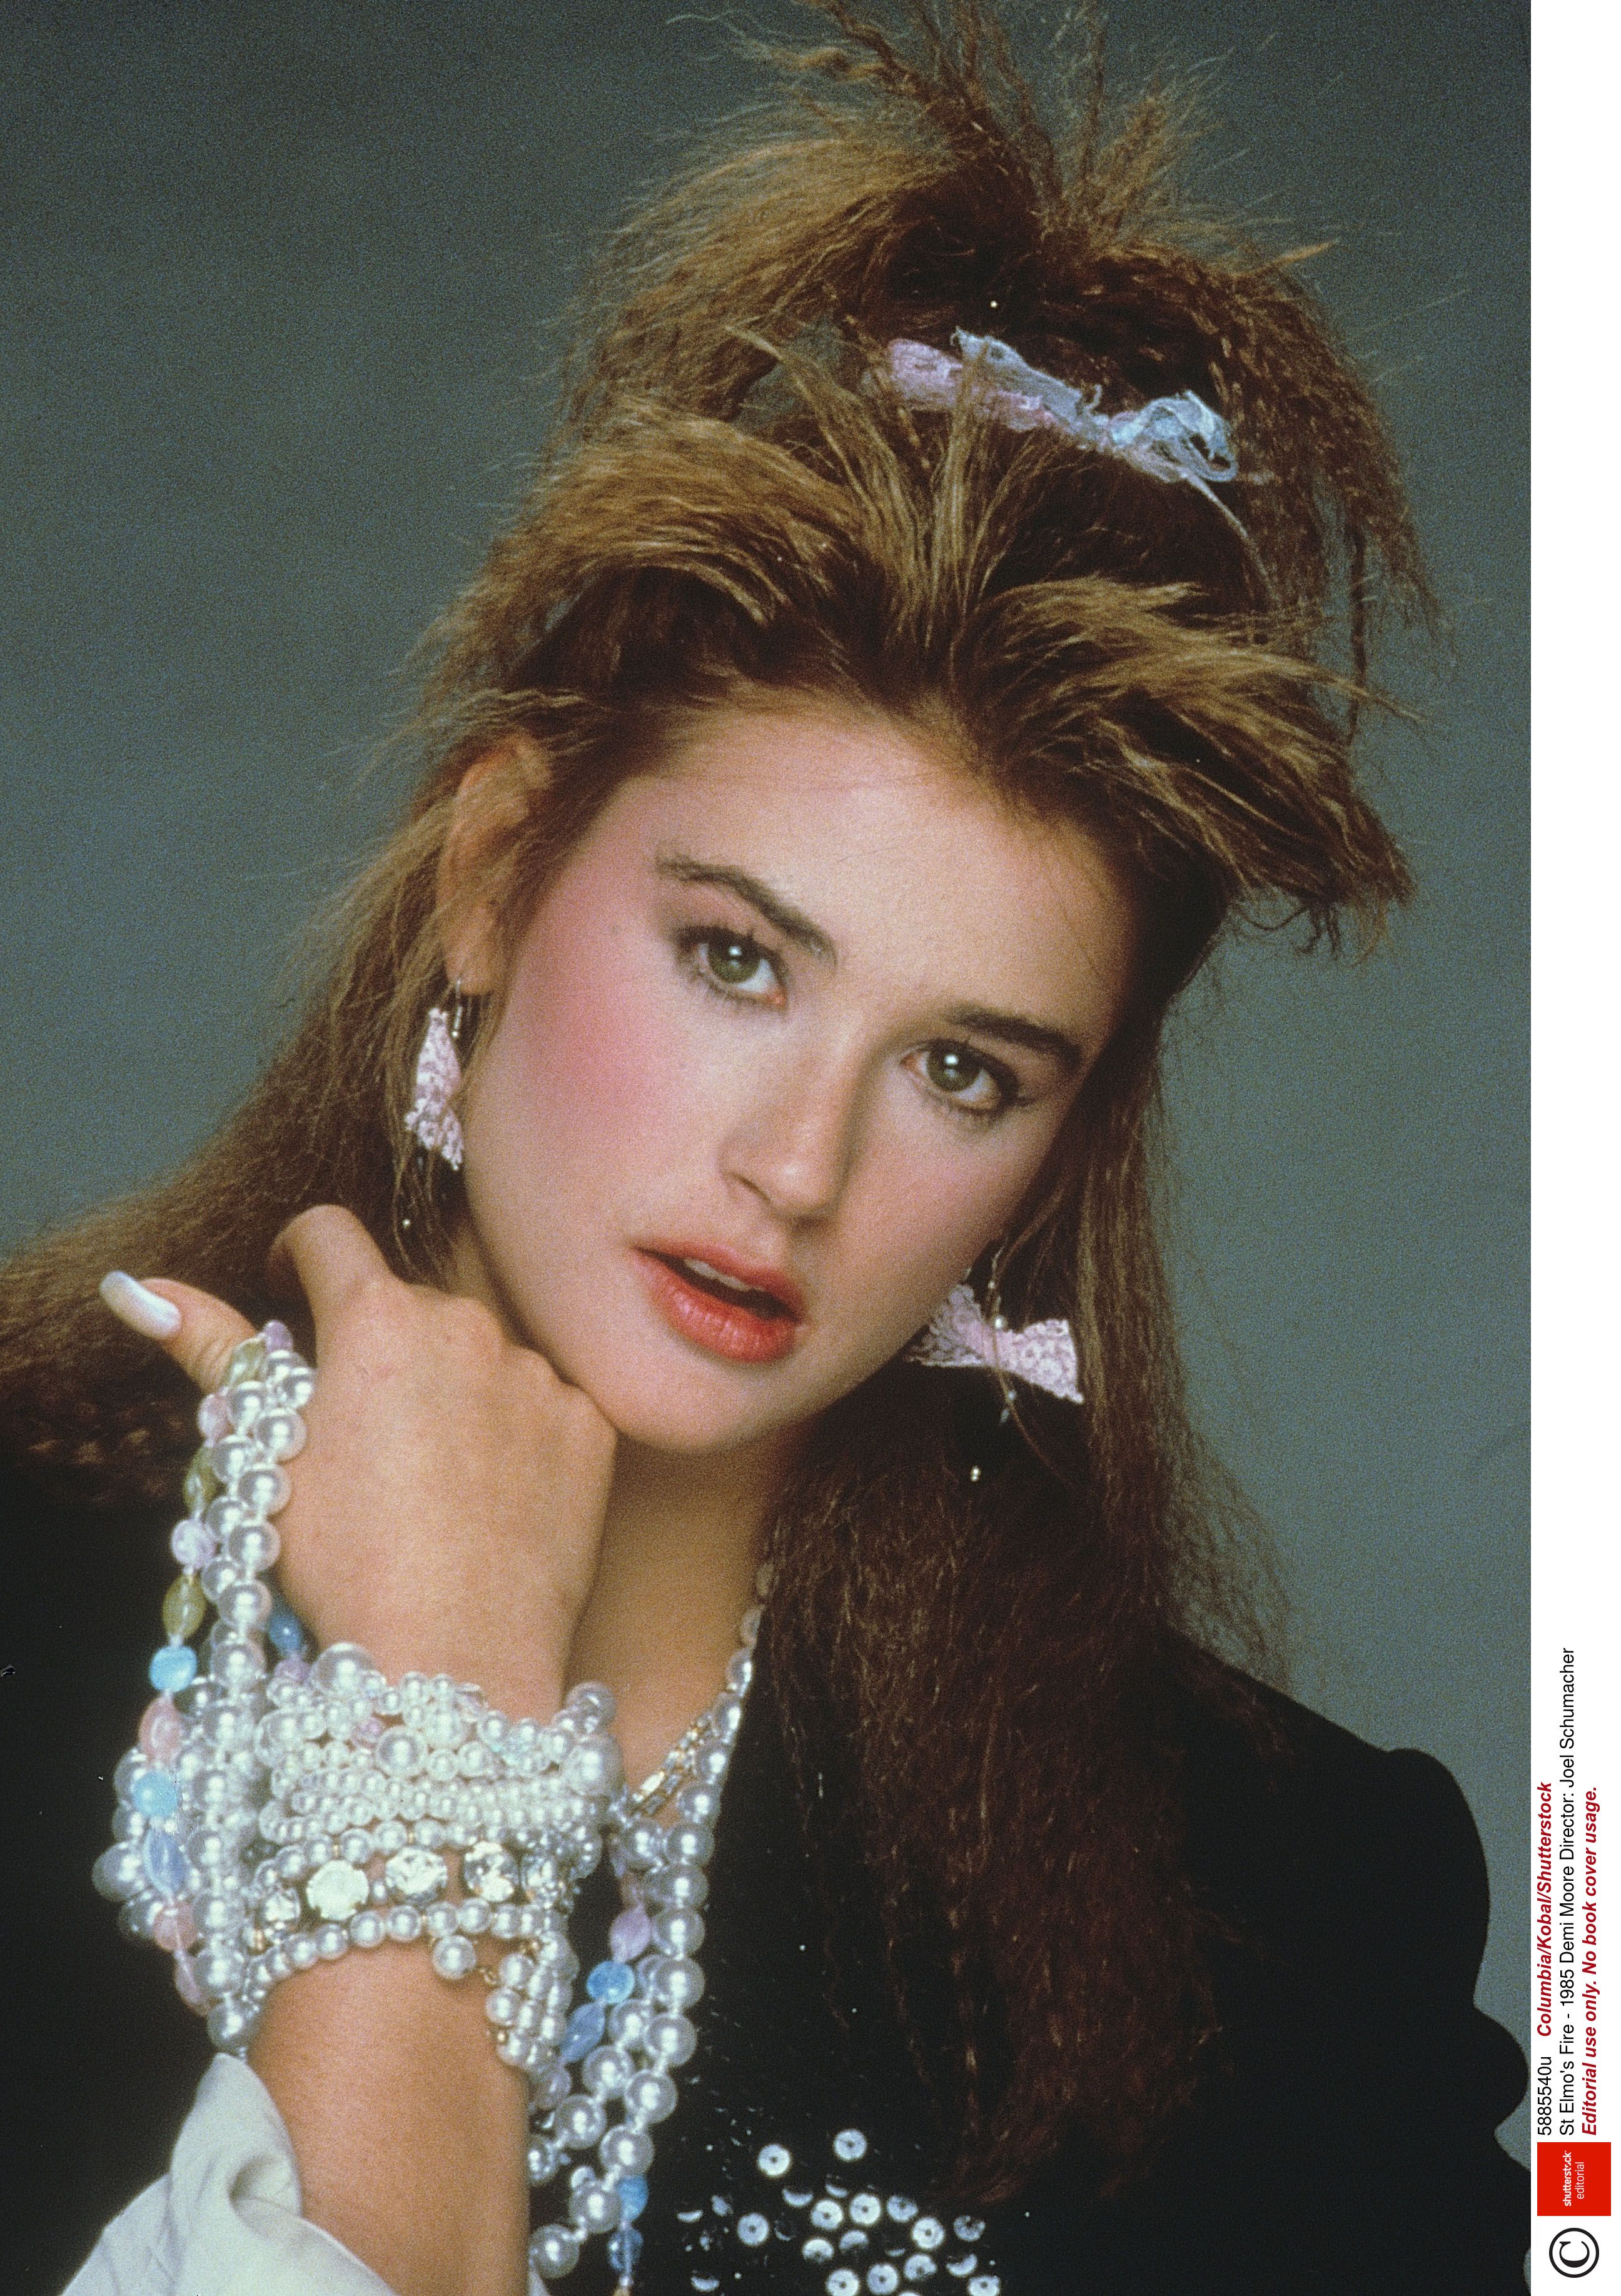 10 Female Fashion Icons From The 80s